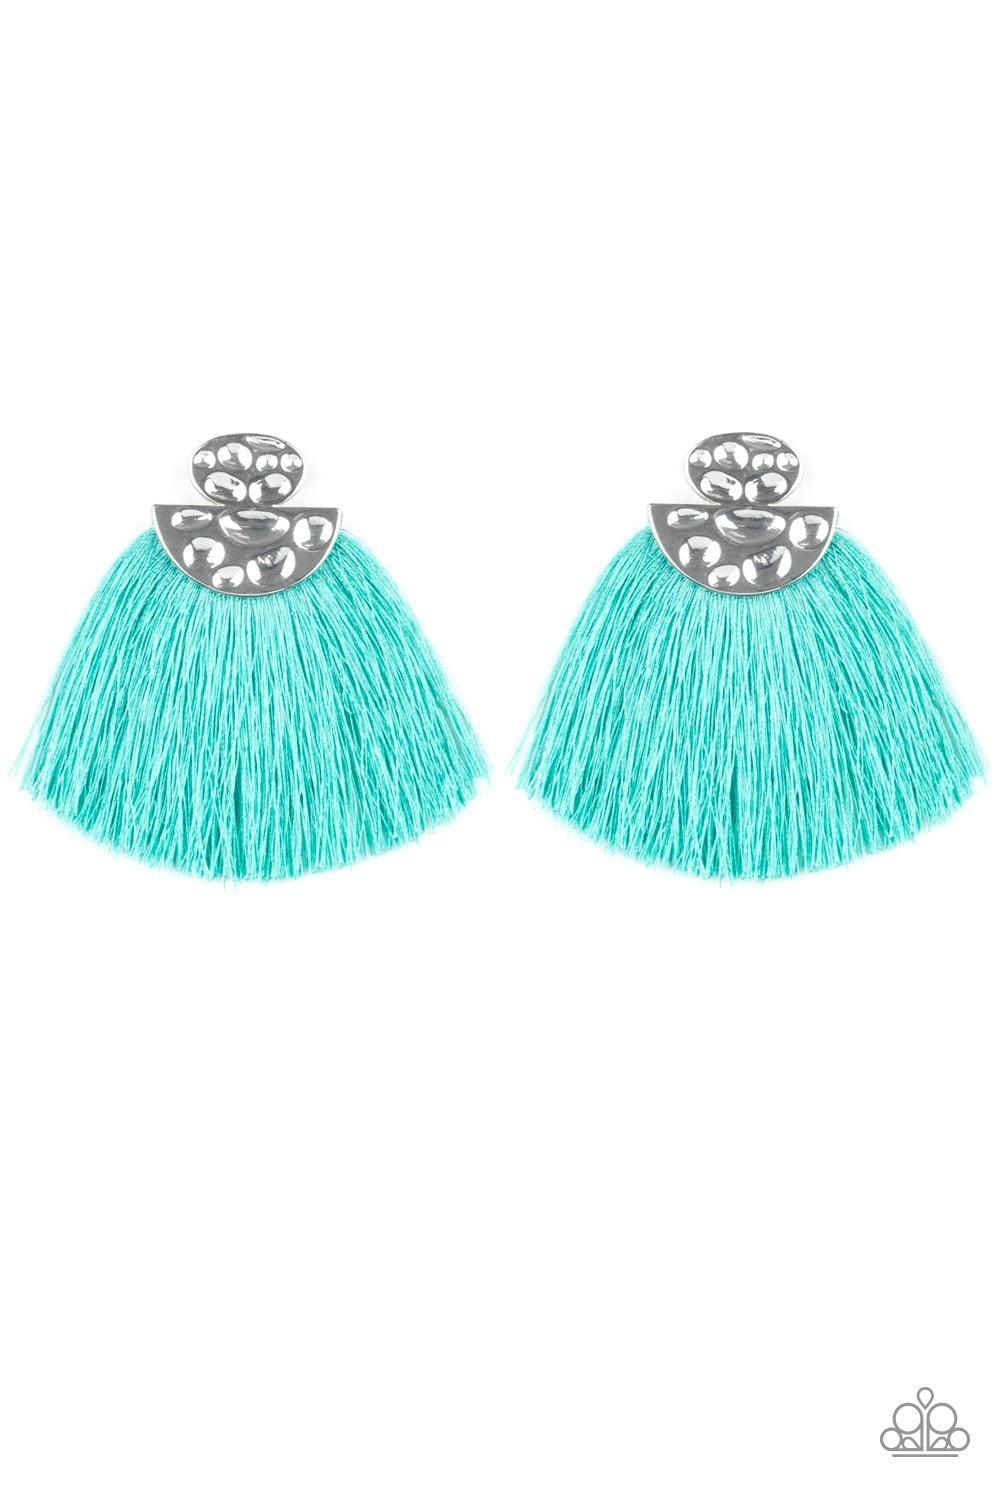 Paparazzi Accessories - Make Some Plume - Blue Earrings - Bling by JessieK